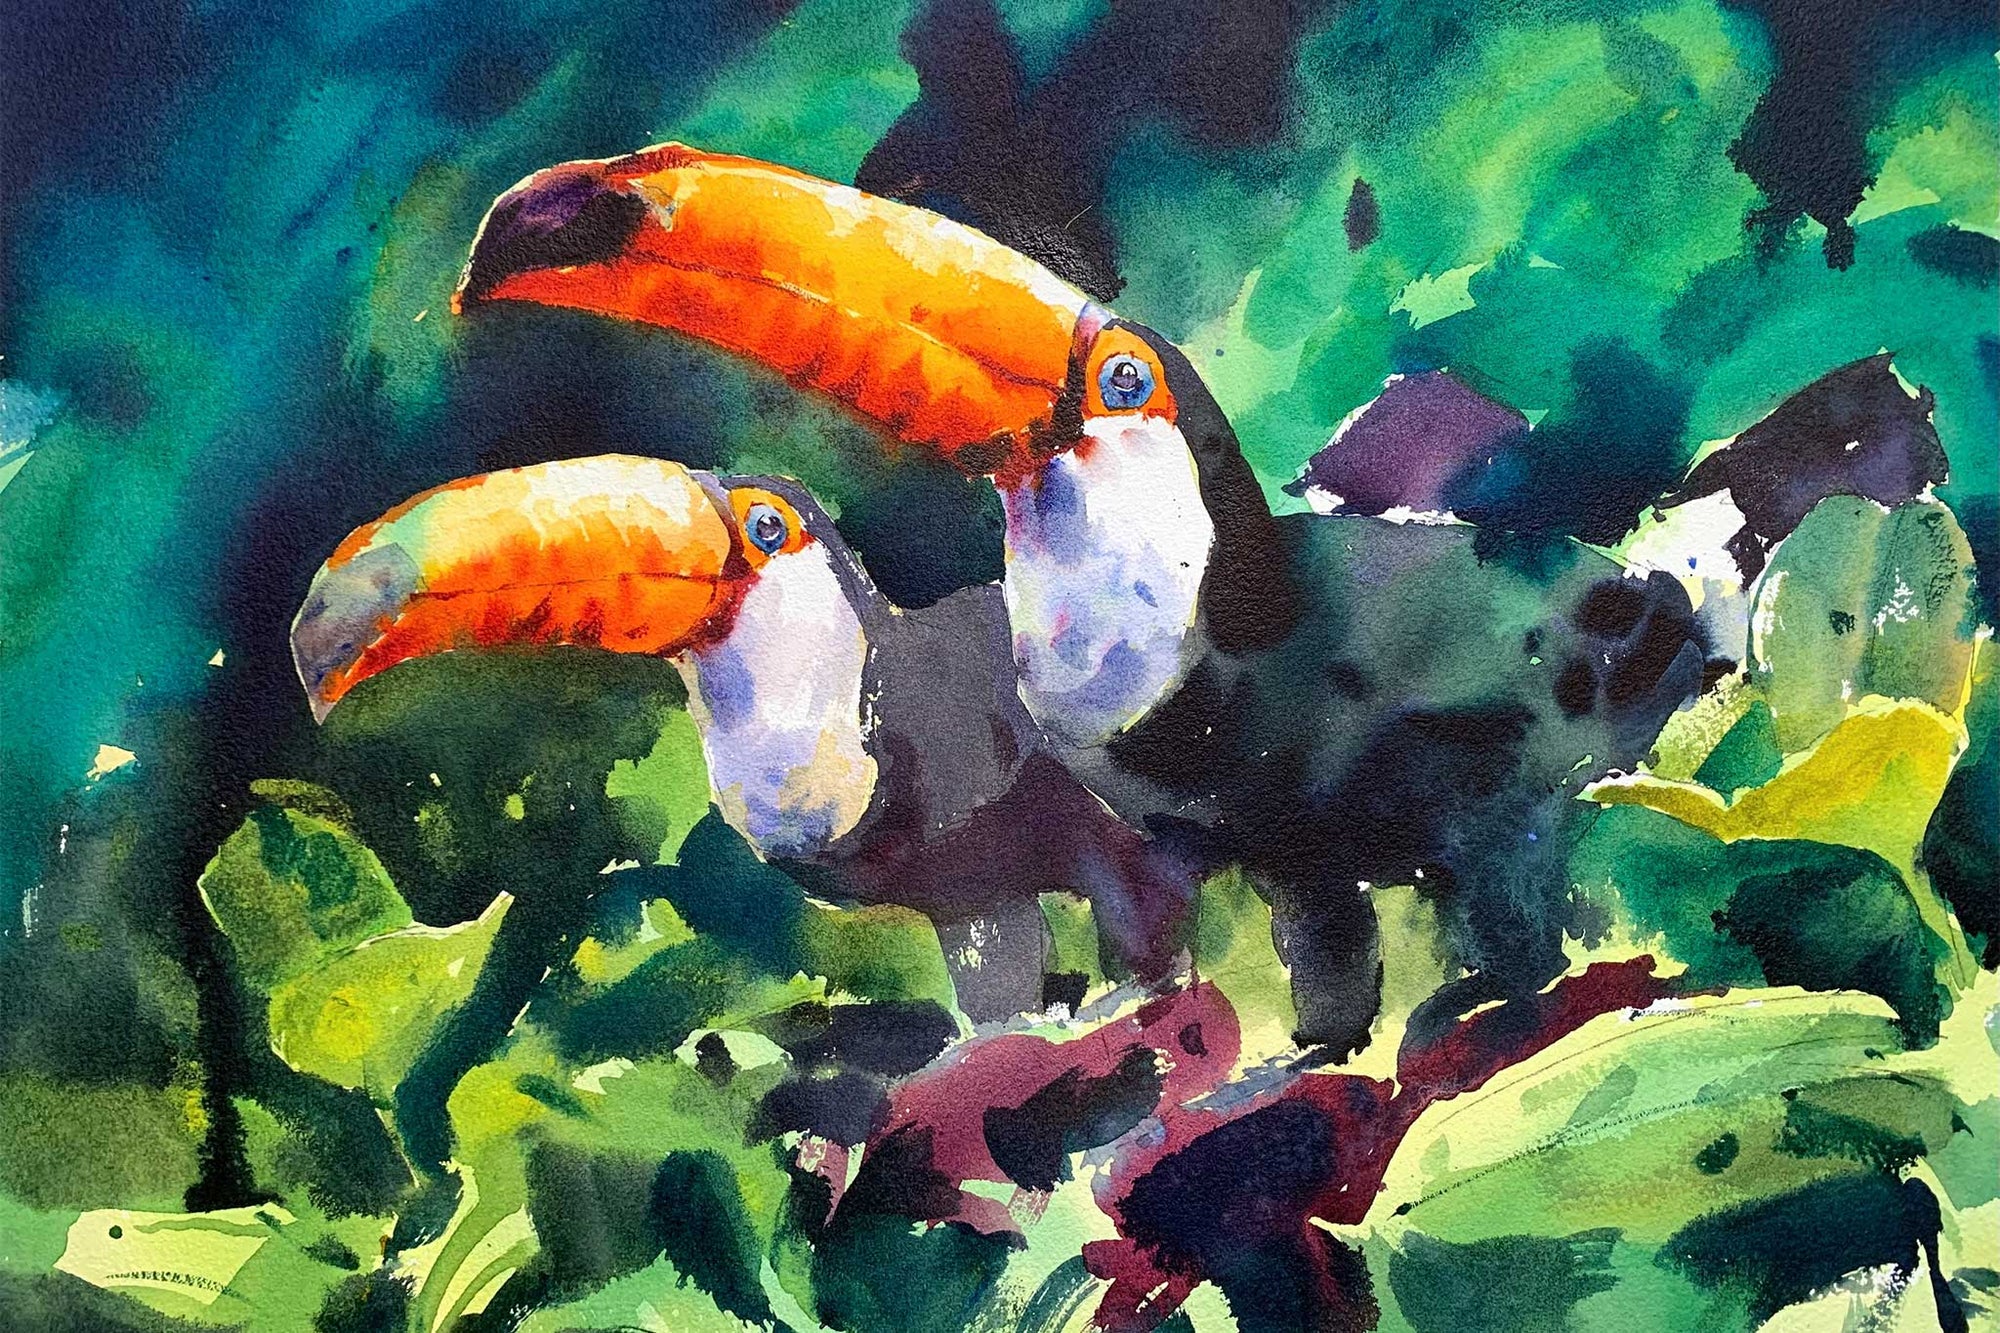 Toucans - Going Big With Backgrounds